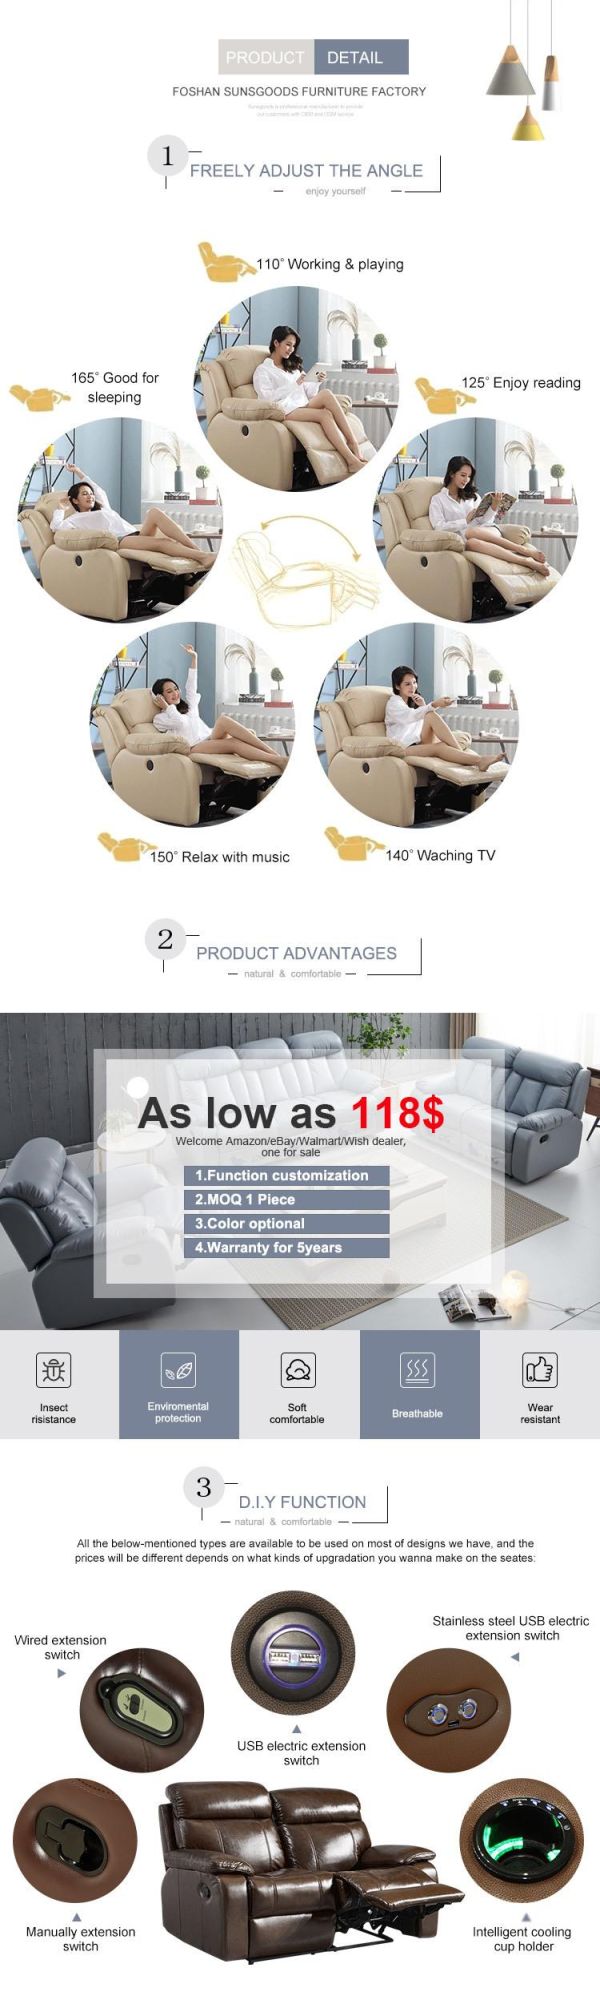 3 2 1 Sofa Set Designs Adjustable Leather Sofa Recliner Chair for Sale